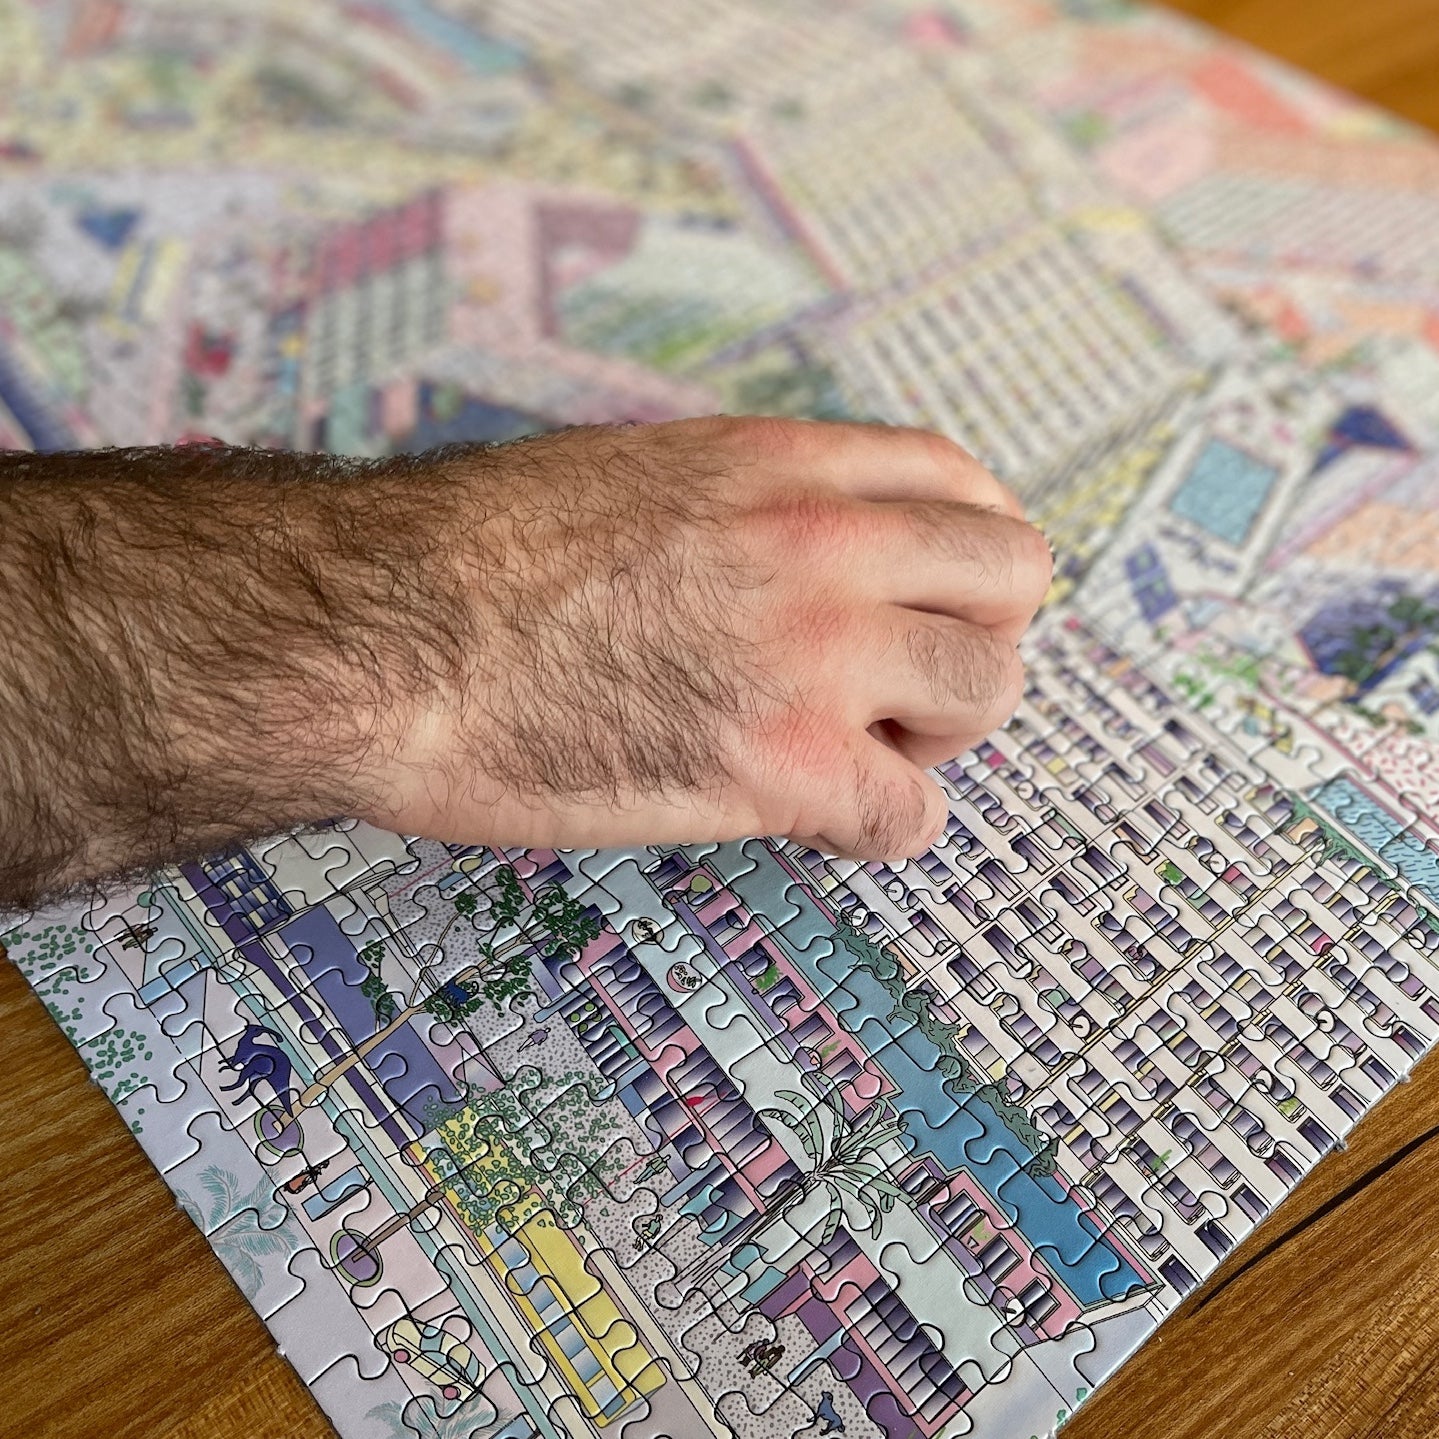 A light-skinned, dark-haired hand places a last piece onto a puzzle with an illustration of Kottbusser Tor with dinosaurs.